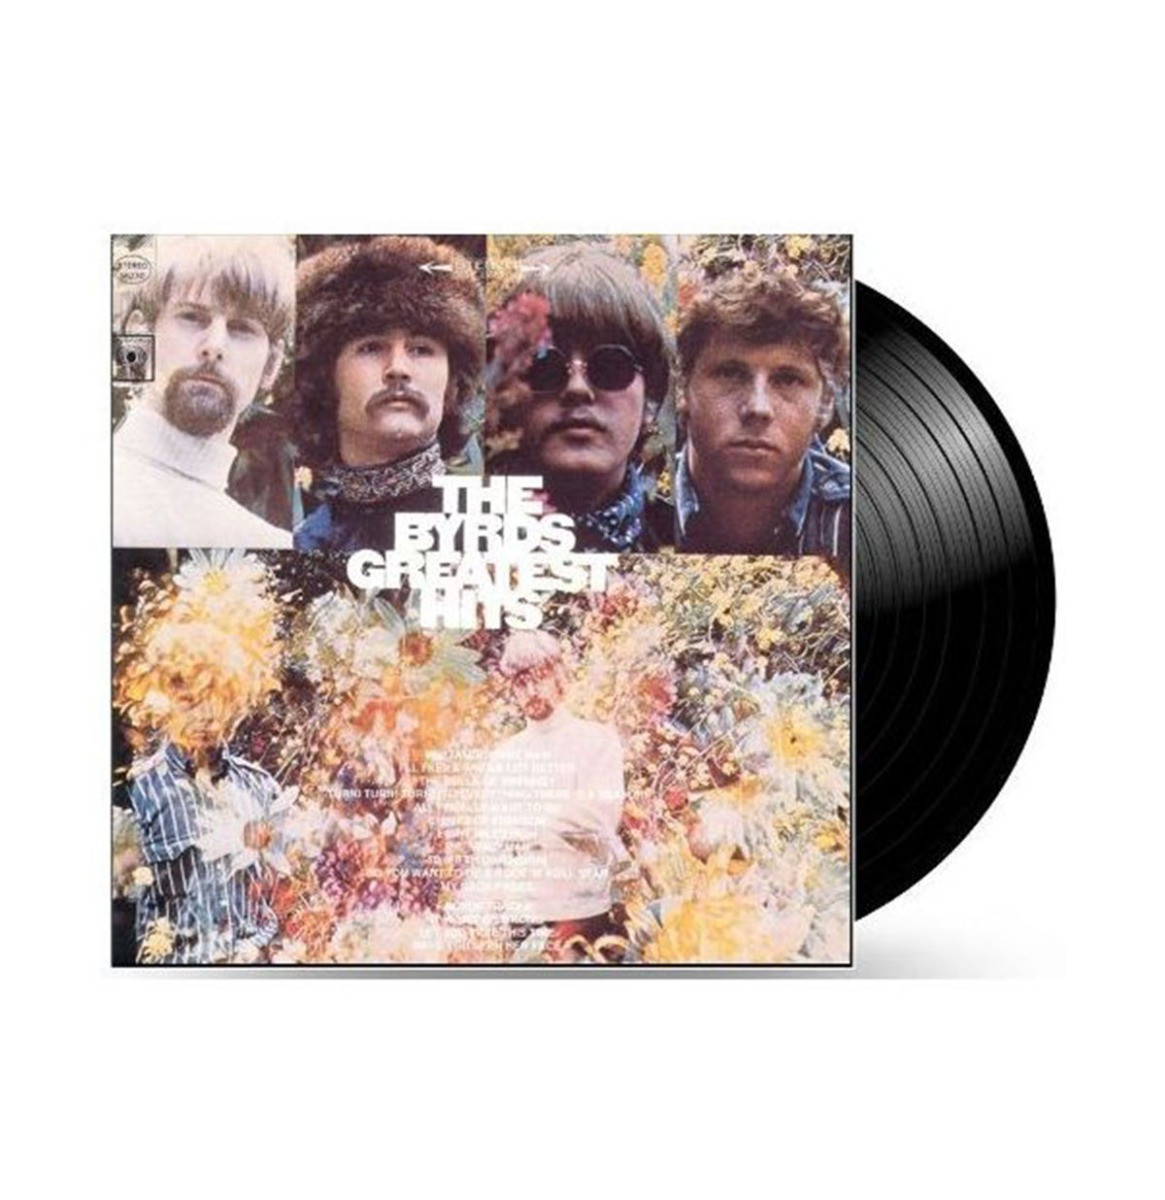 The Byrds - Greatest Hits LP